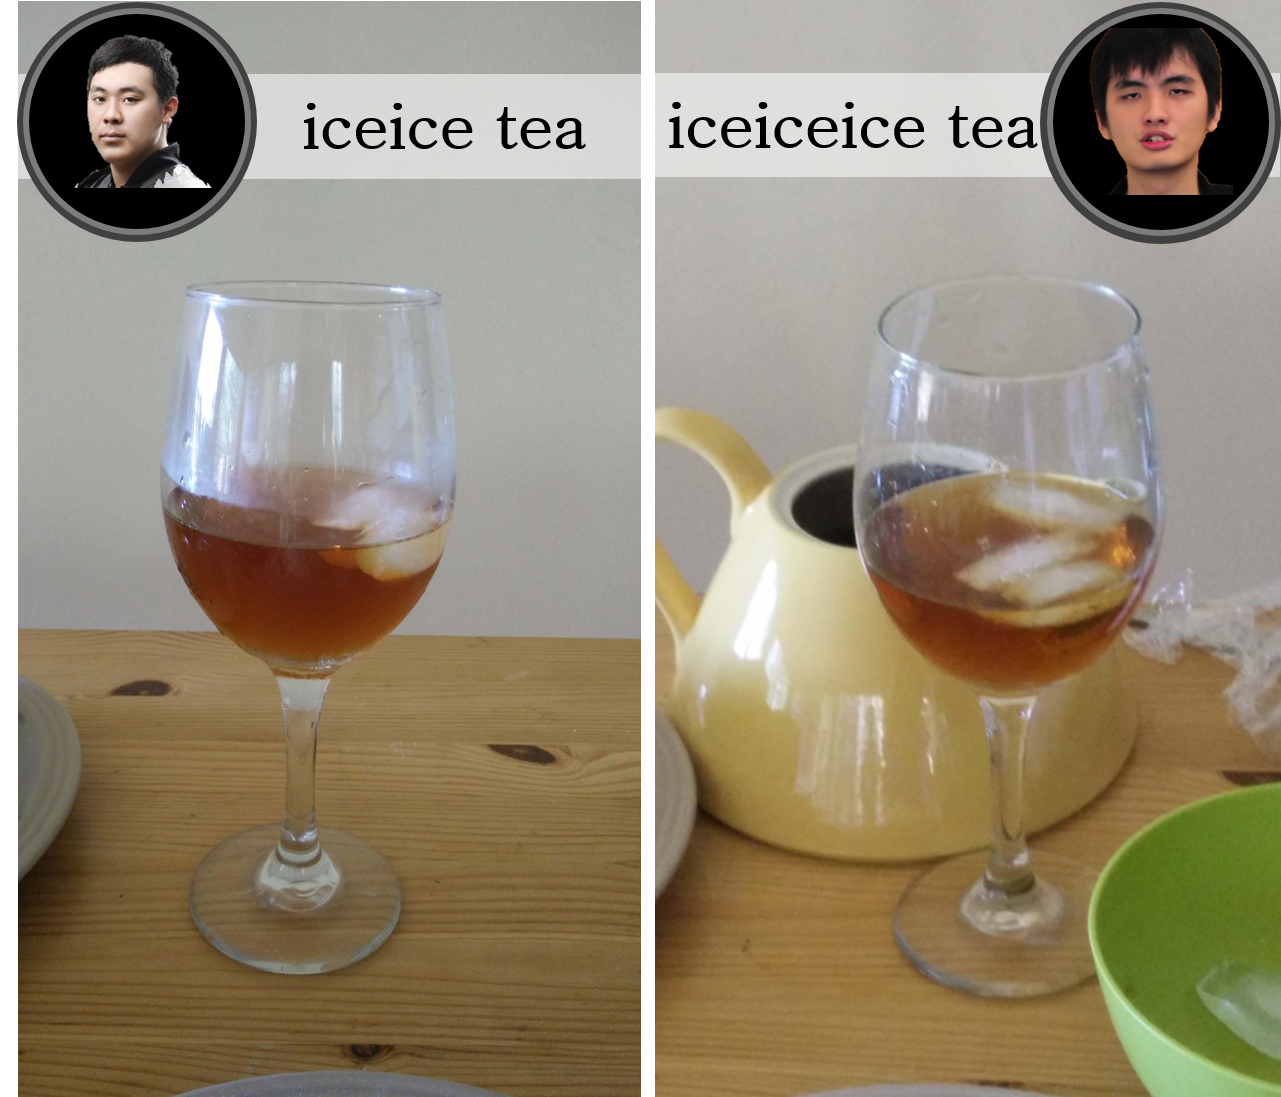 Ice Ice tea or Ice Ice Ice tea, depending on which dota 2 player you root for